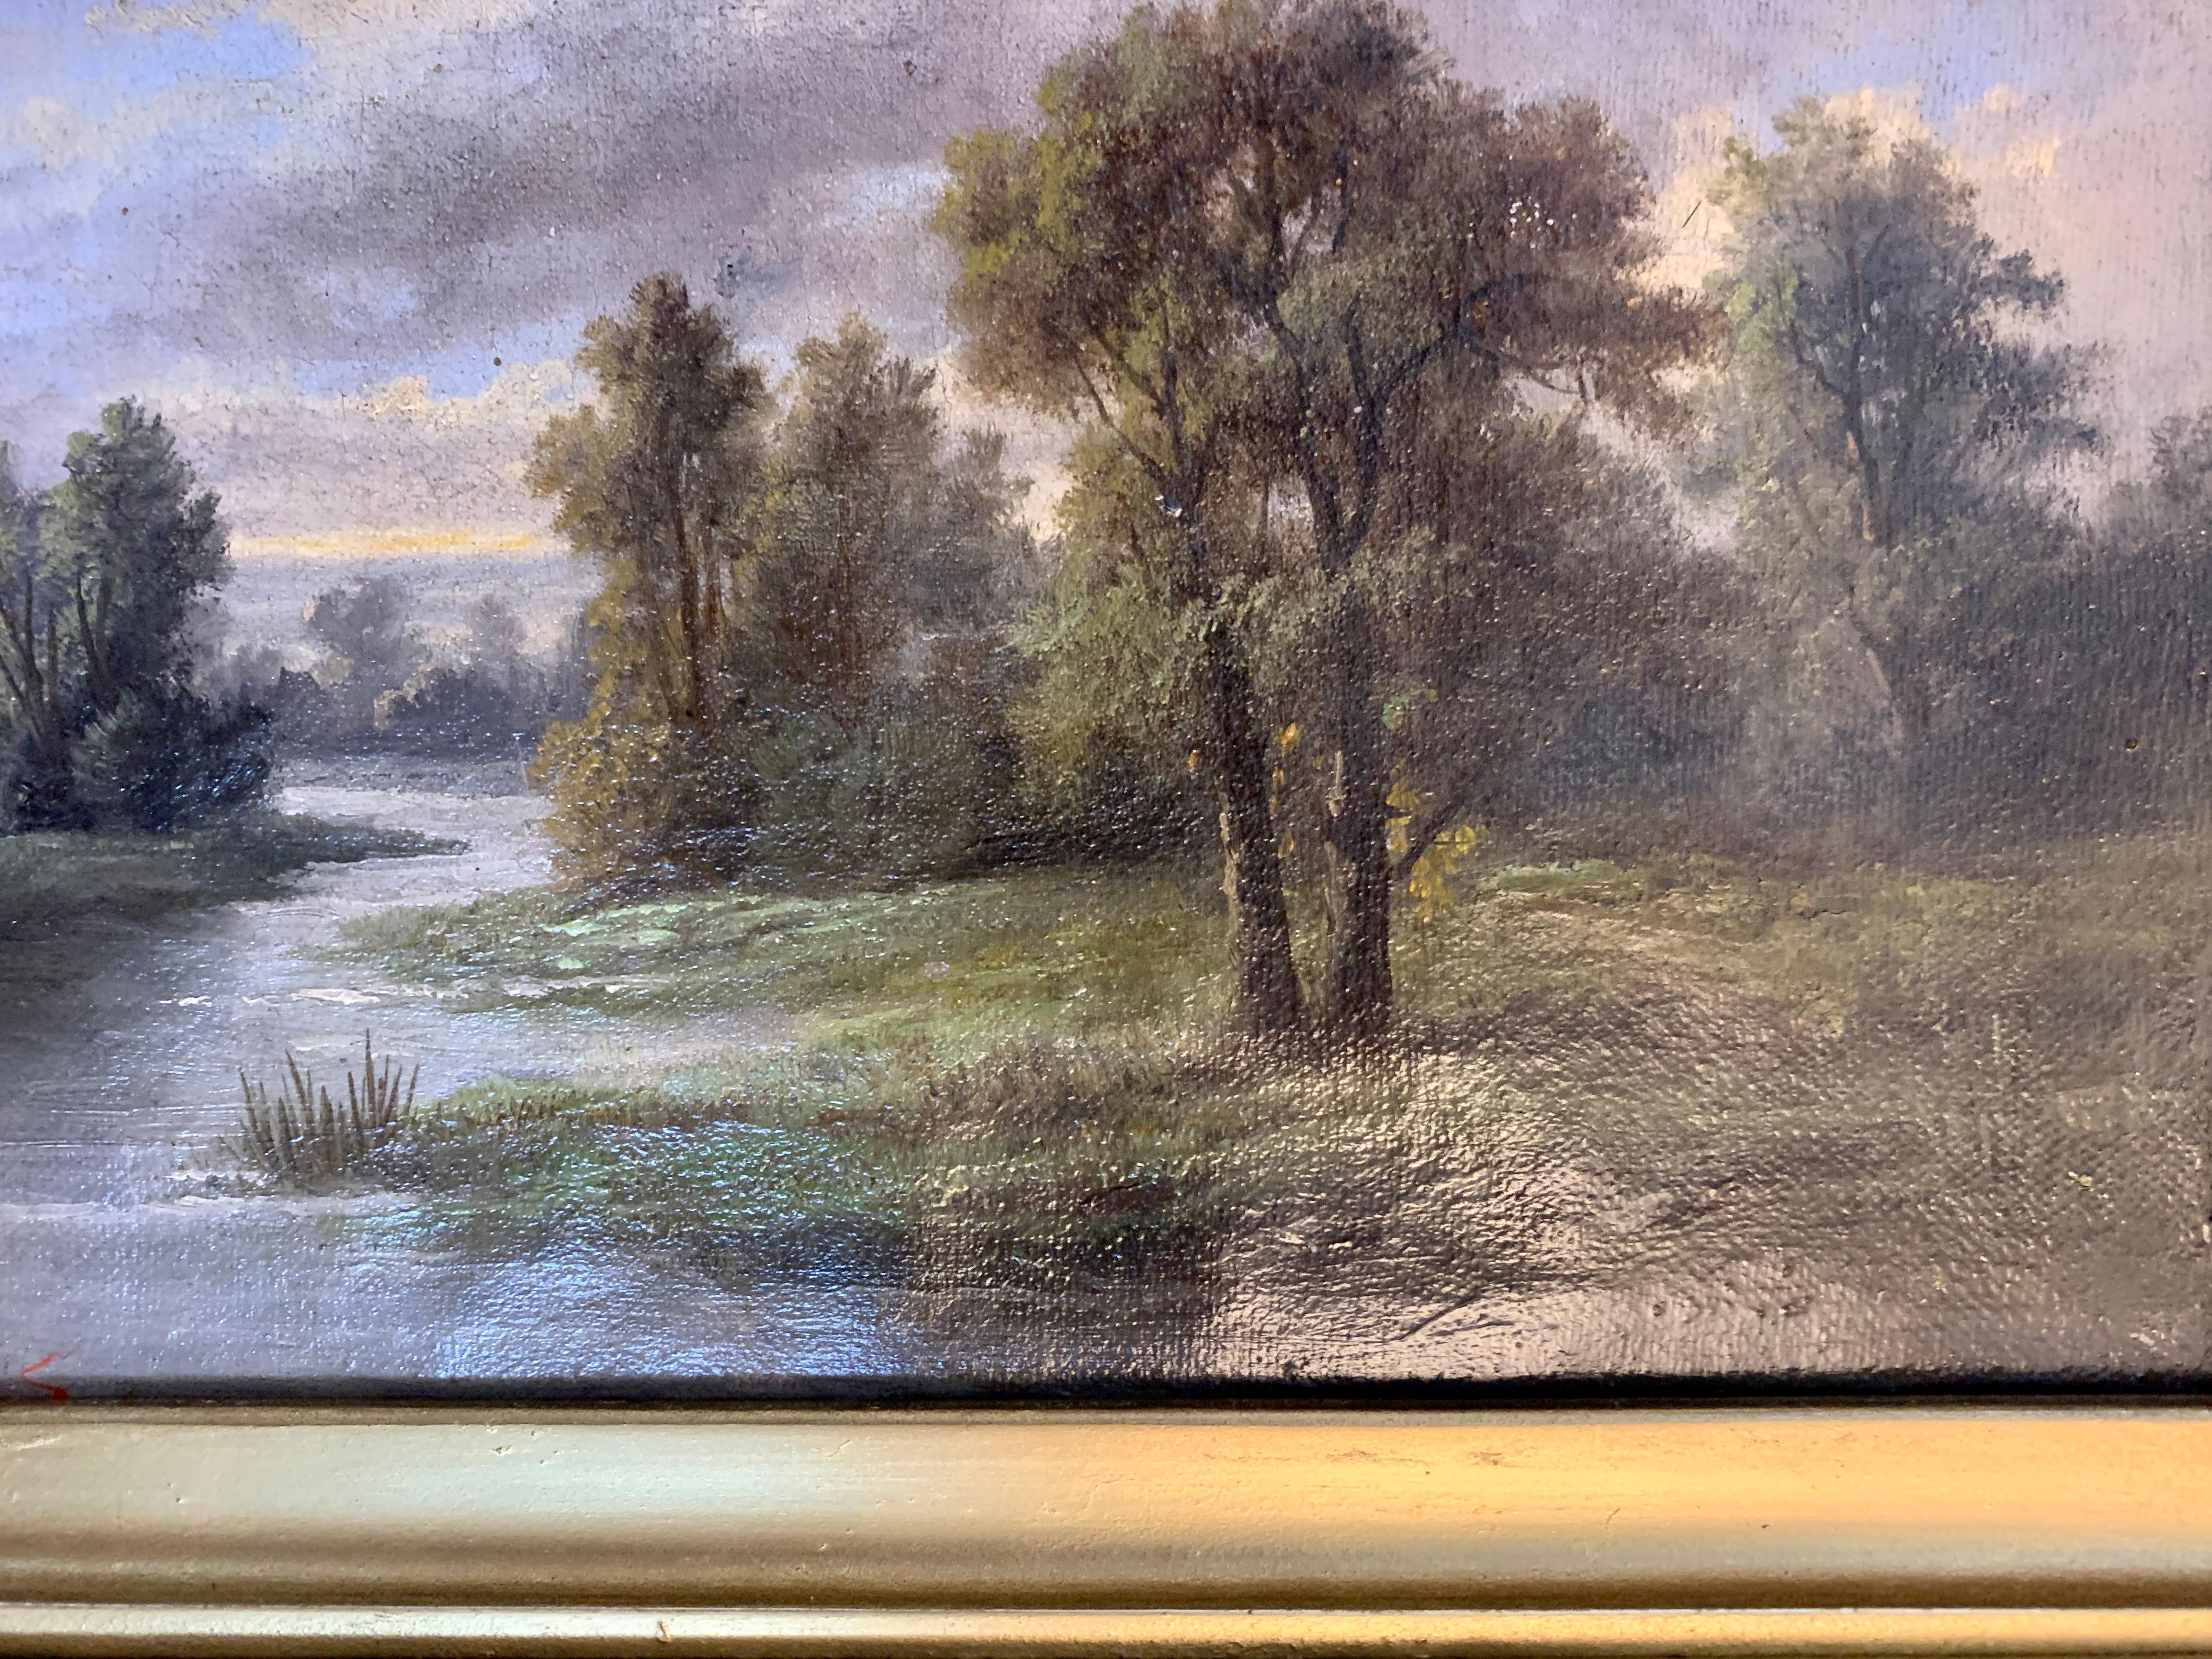 19th century English landscape with Oak and Yew trees on a pathway by a stream For Sale 1